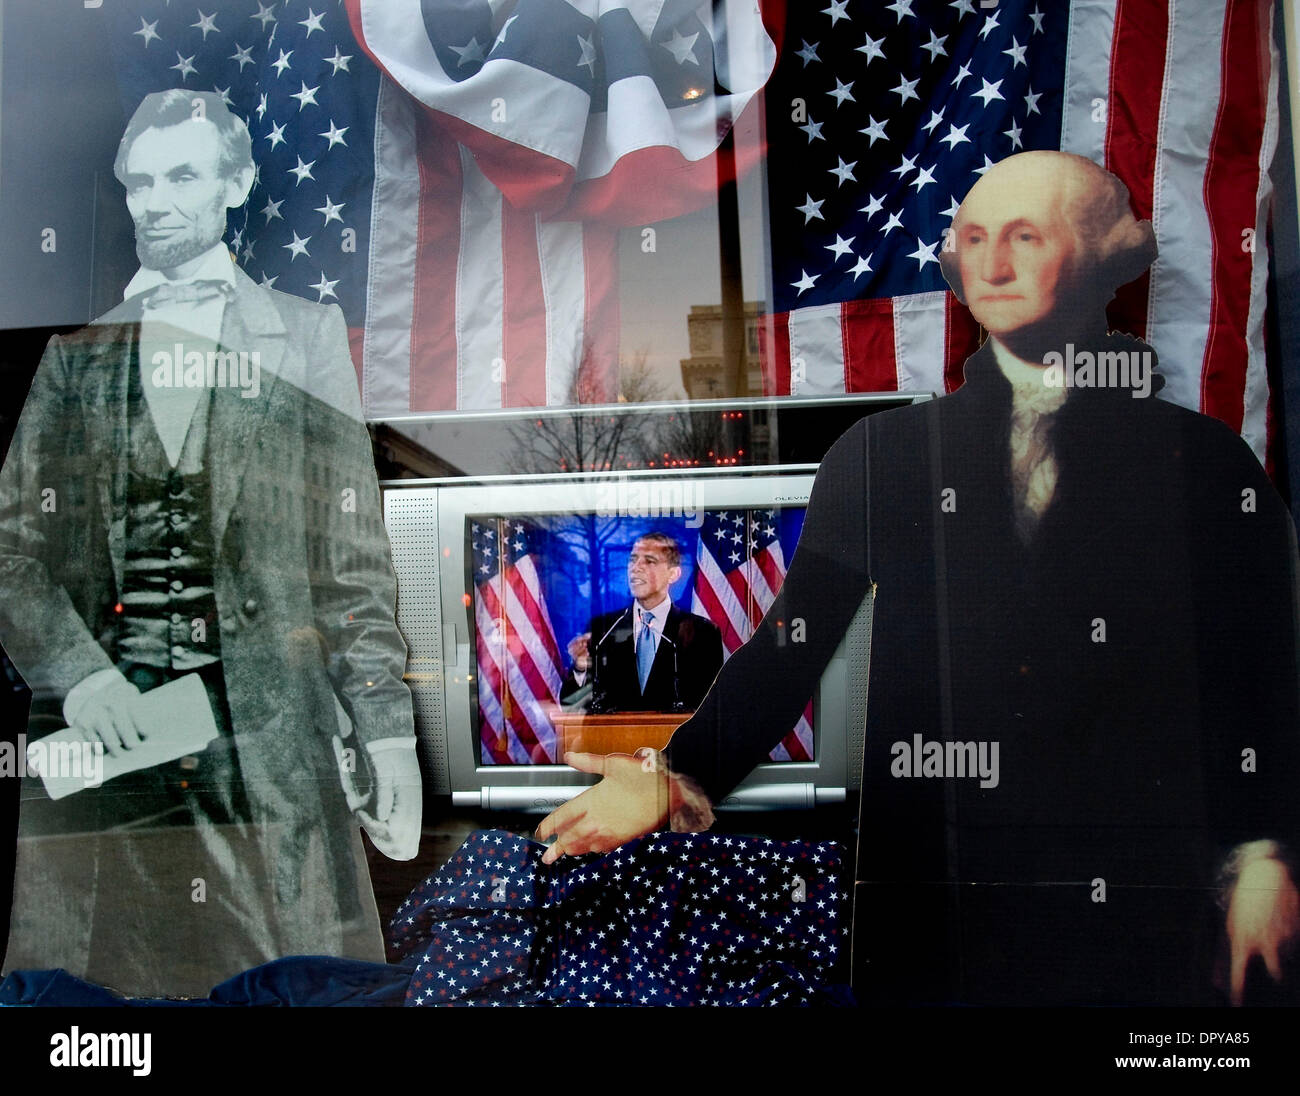 Jan 18, 2009 - Washington, District of Columbia, USA - A video of Obama's election night speech plays on a television in a political memorabilia store in Washington, D.C. on inauguration weekend. (Credit Image: © Pete Marovich/ZUMA Press) Stock Photo